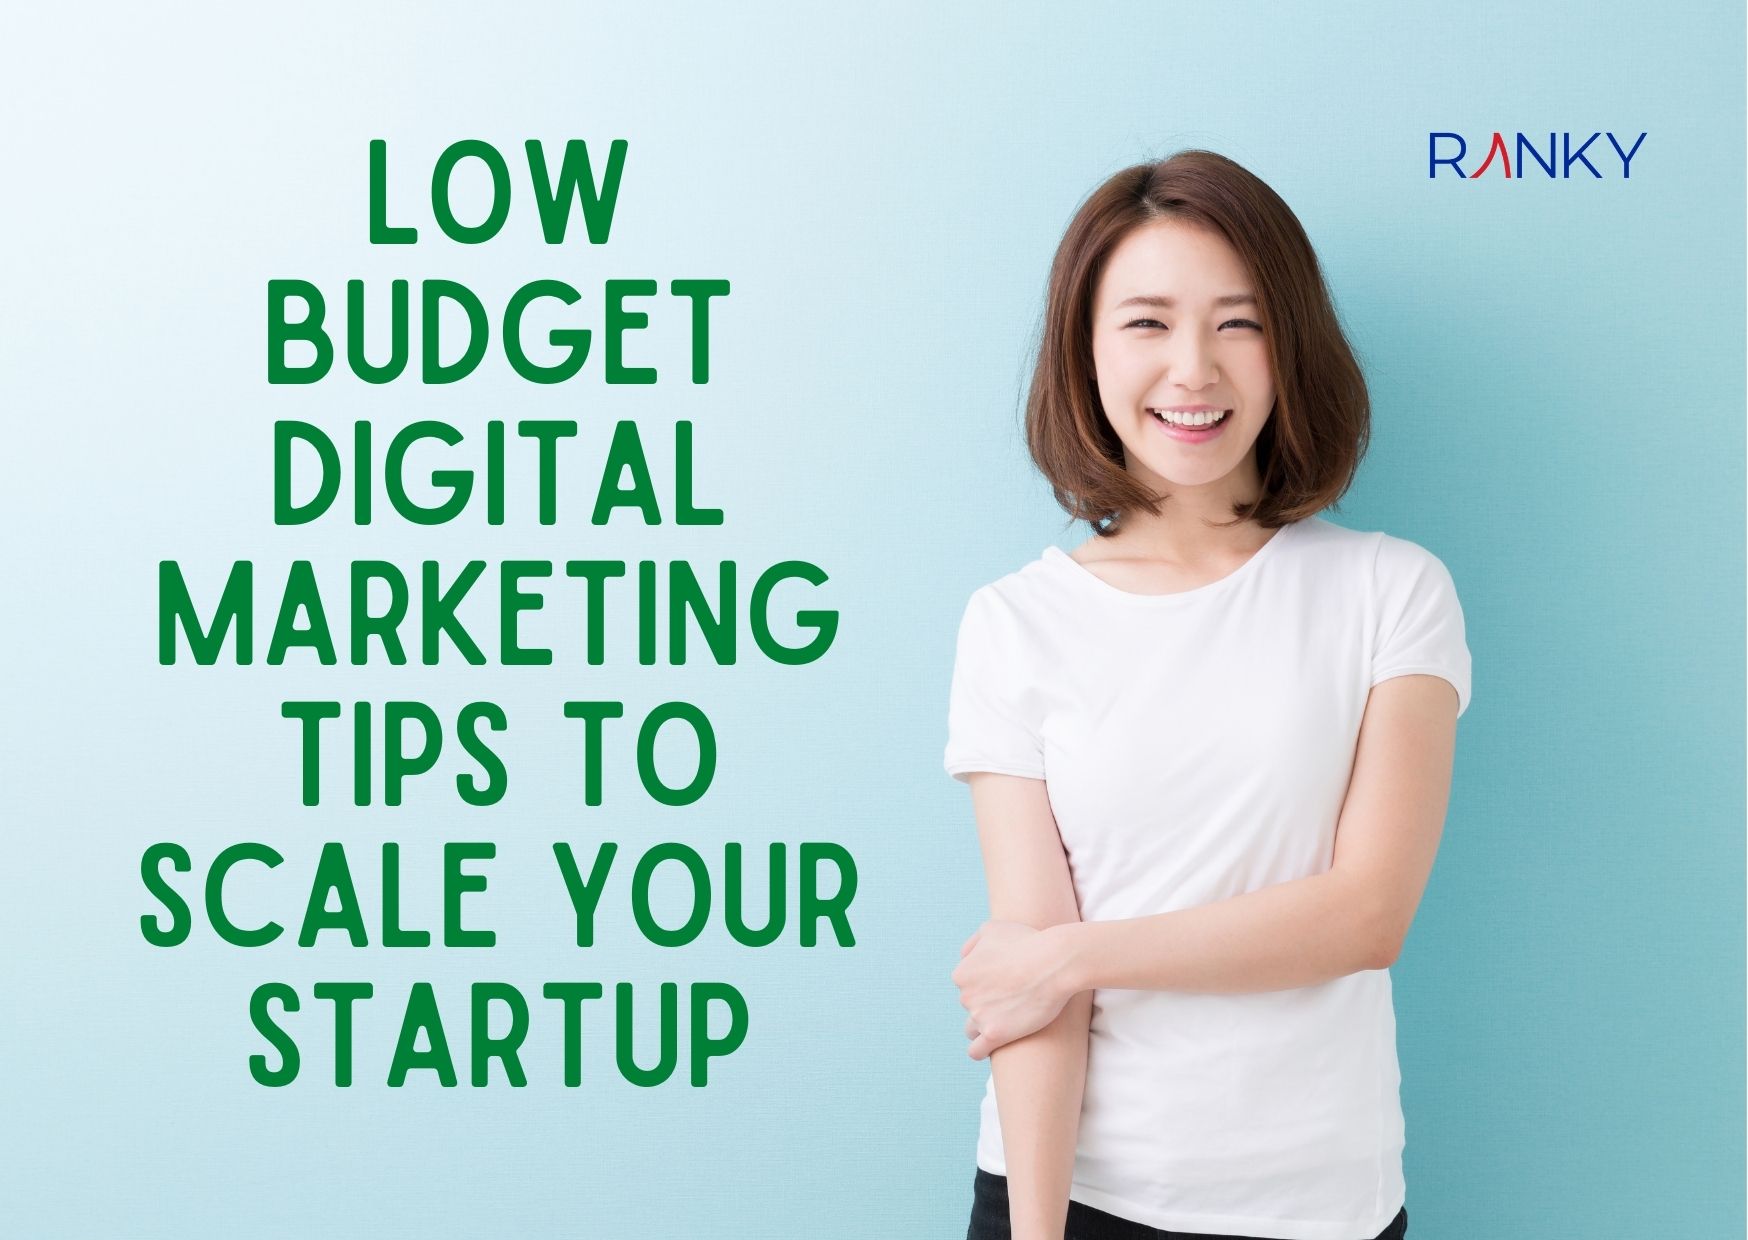 10 Low Budget Digital Marketing Tips to Scale Your Startup